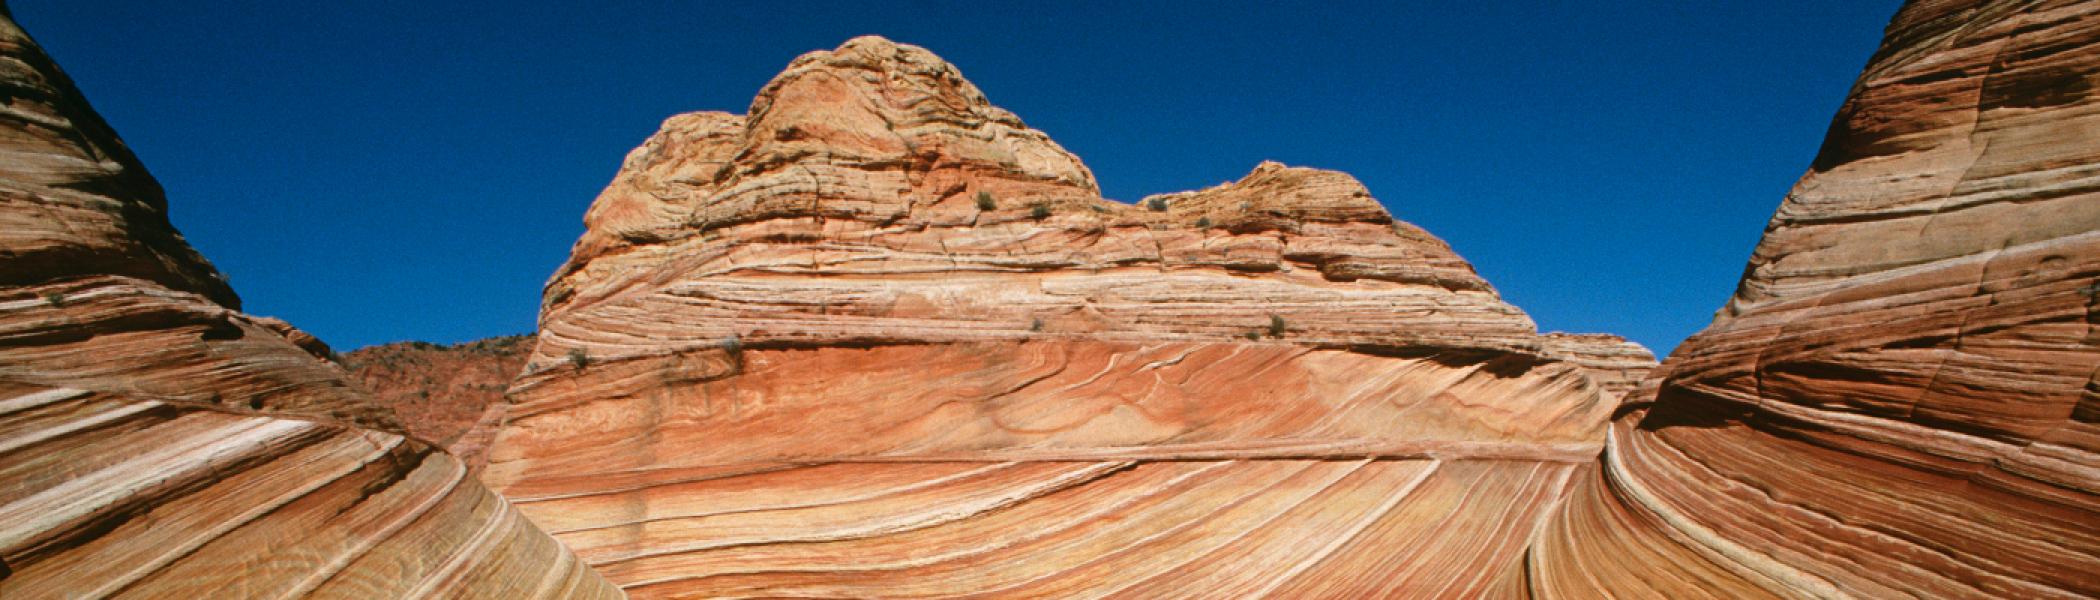 Brown rock formations in the desert against a blue sky